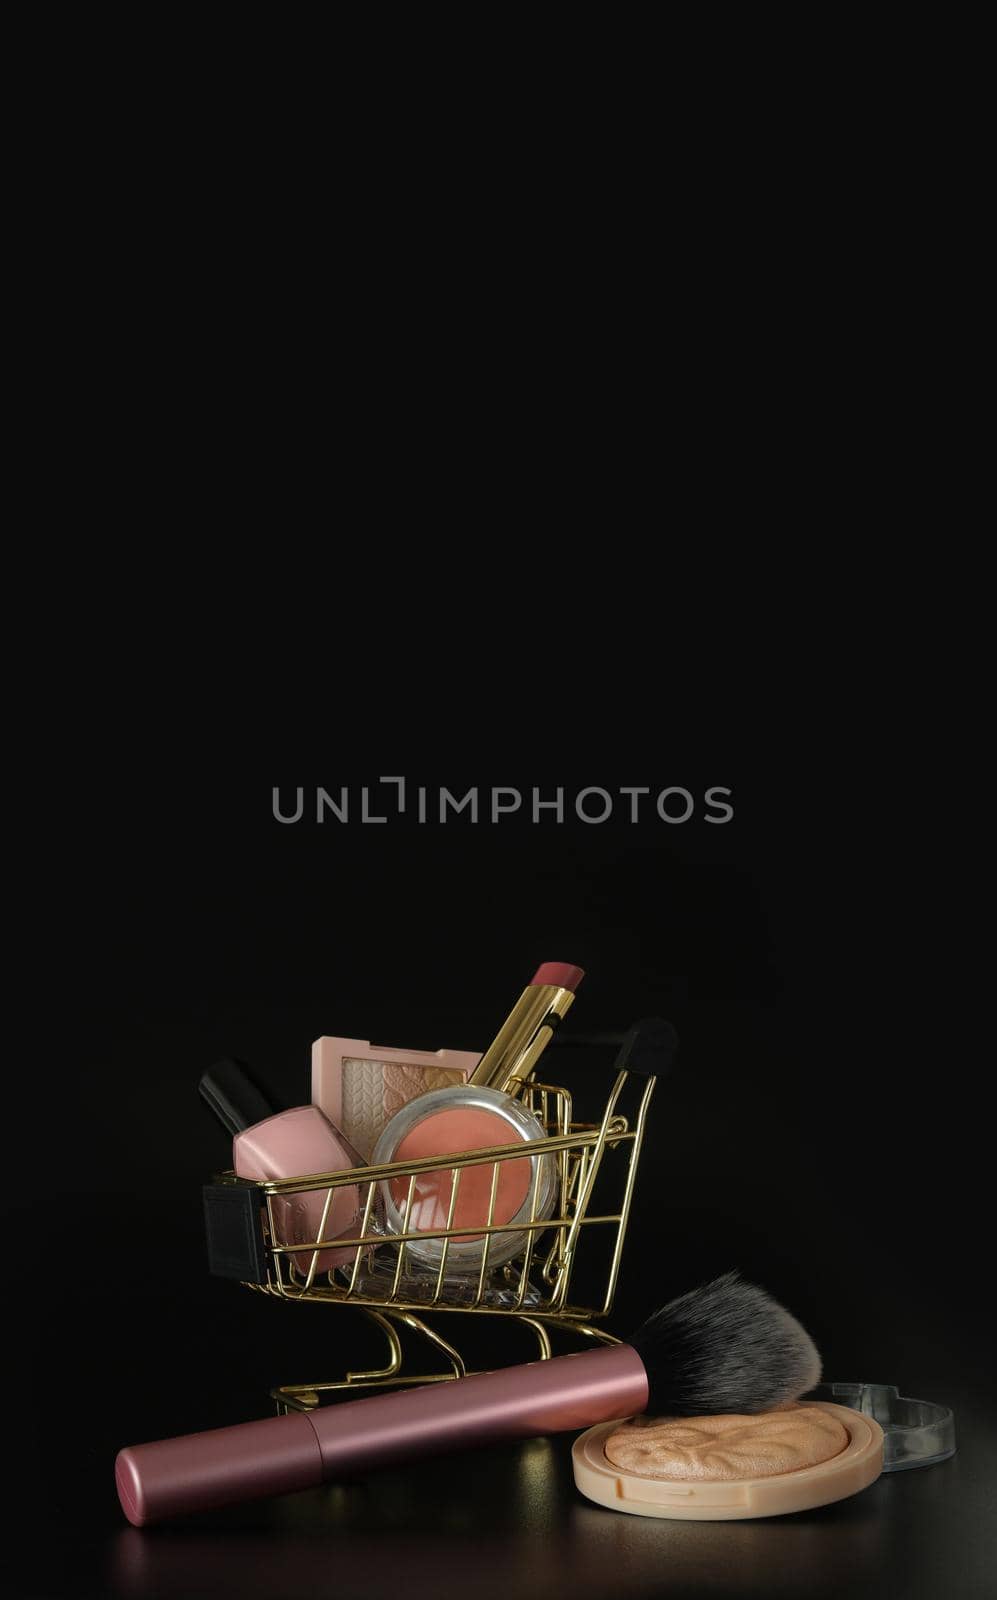 Shopping trolley full of make up and cosmetic goods on black background. Black friday concept. Sale and discount. Goods for women. Closeup of a basket with products for make-up. Beauty background, free space for text, copy space, modern layout. by creativebird